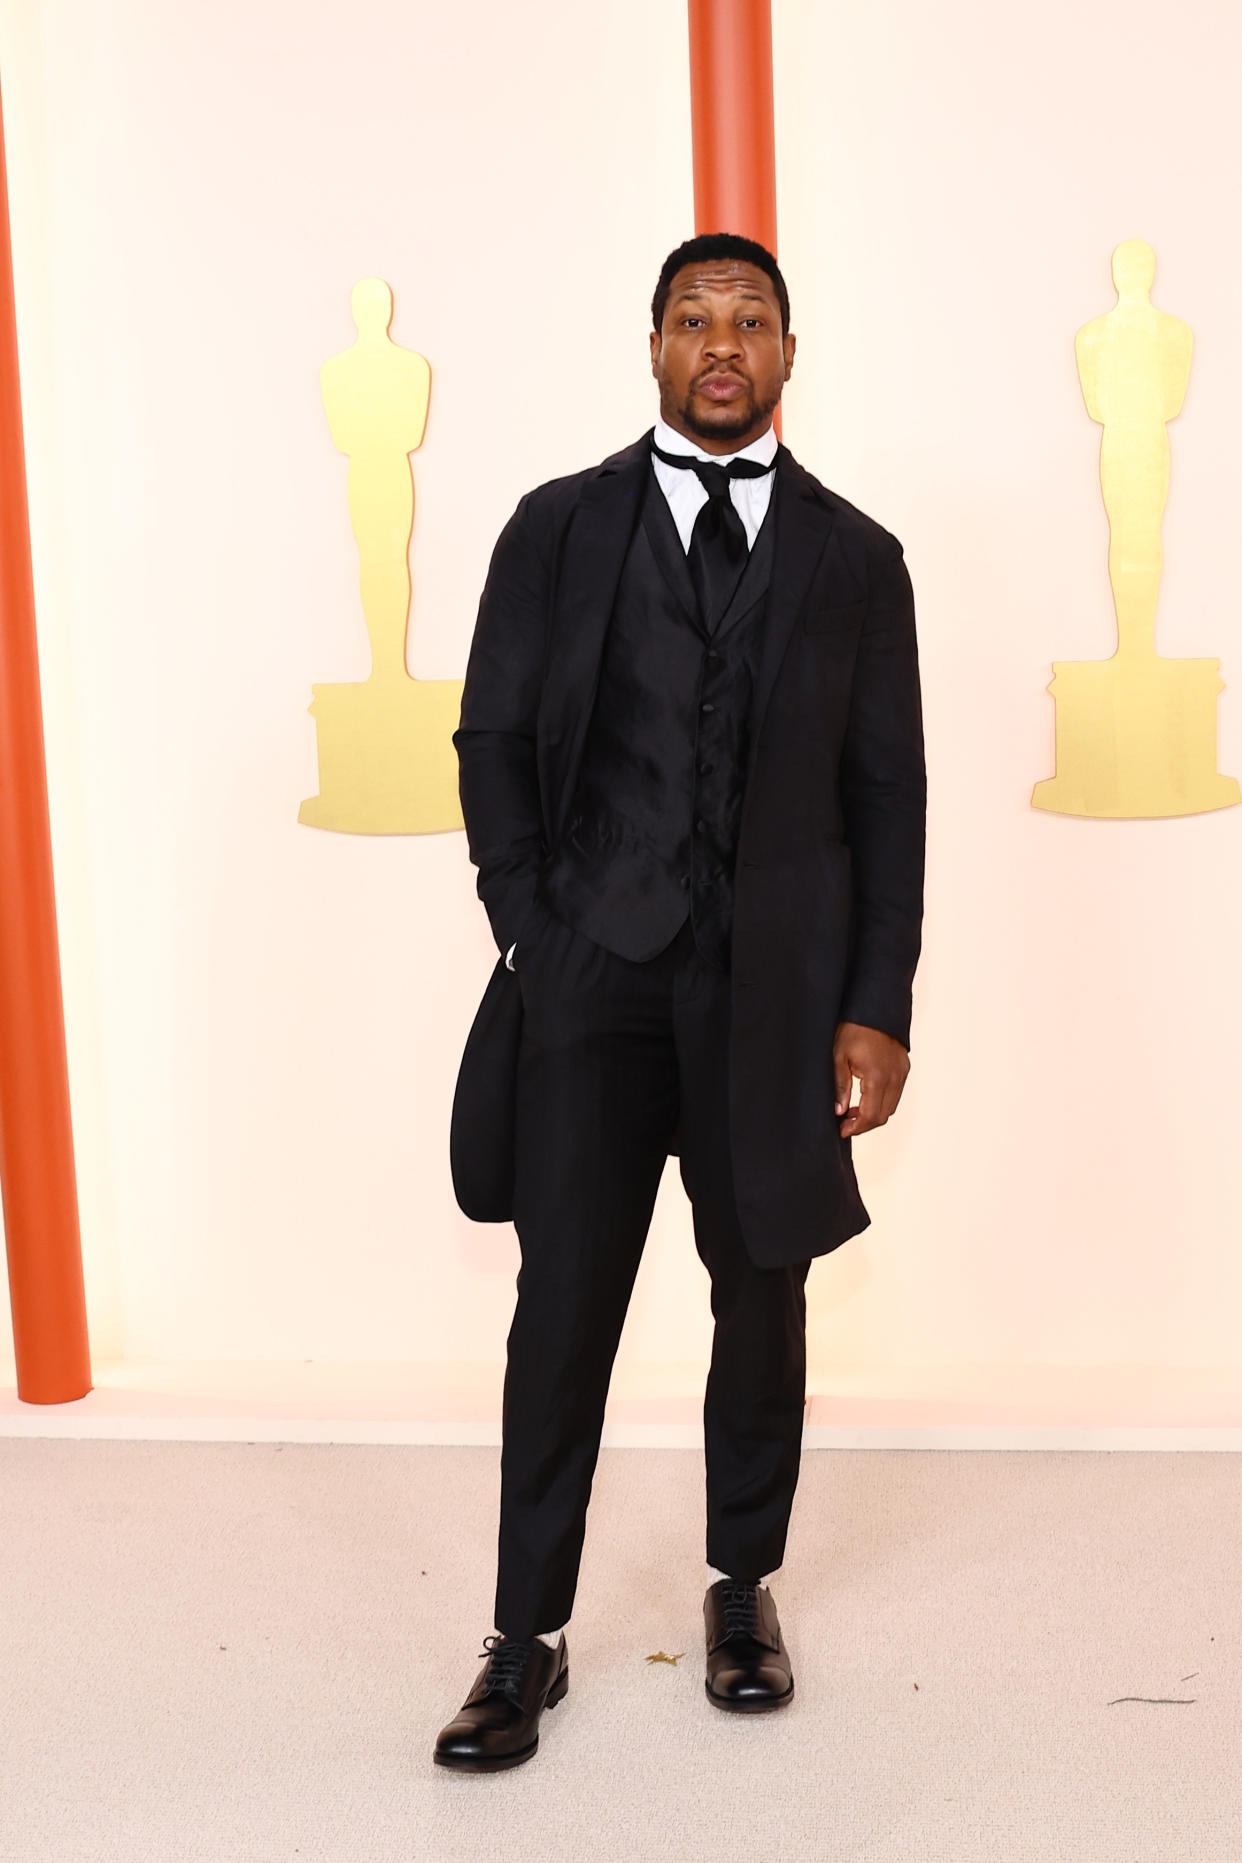 HOLLYWOOD, CALIFORNIA - MARCH 12: Jonathan Majors attends the 95th Annual Academy Awards on March 12, 2023 in Hollywood, California. (Photo by Arturo Holmes/Getty Images )